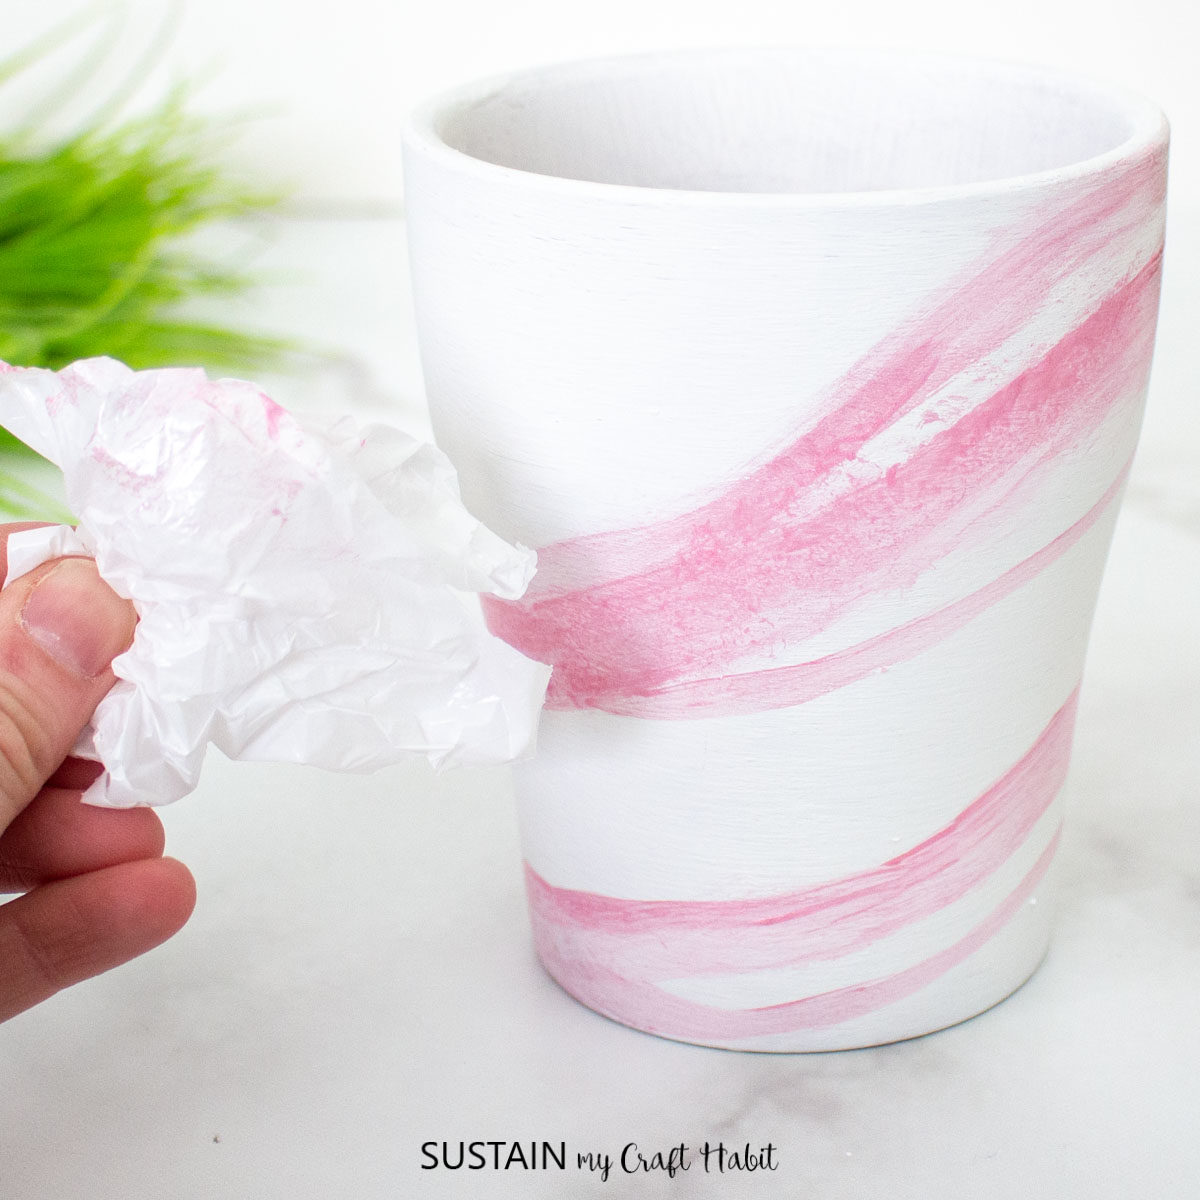 Painting a pink marble effect.